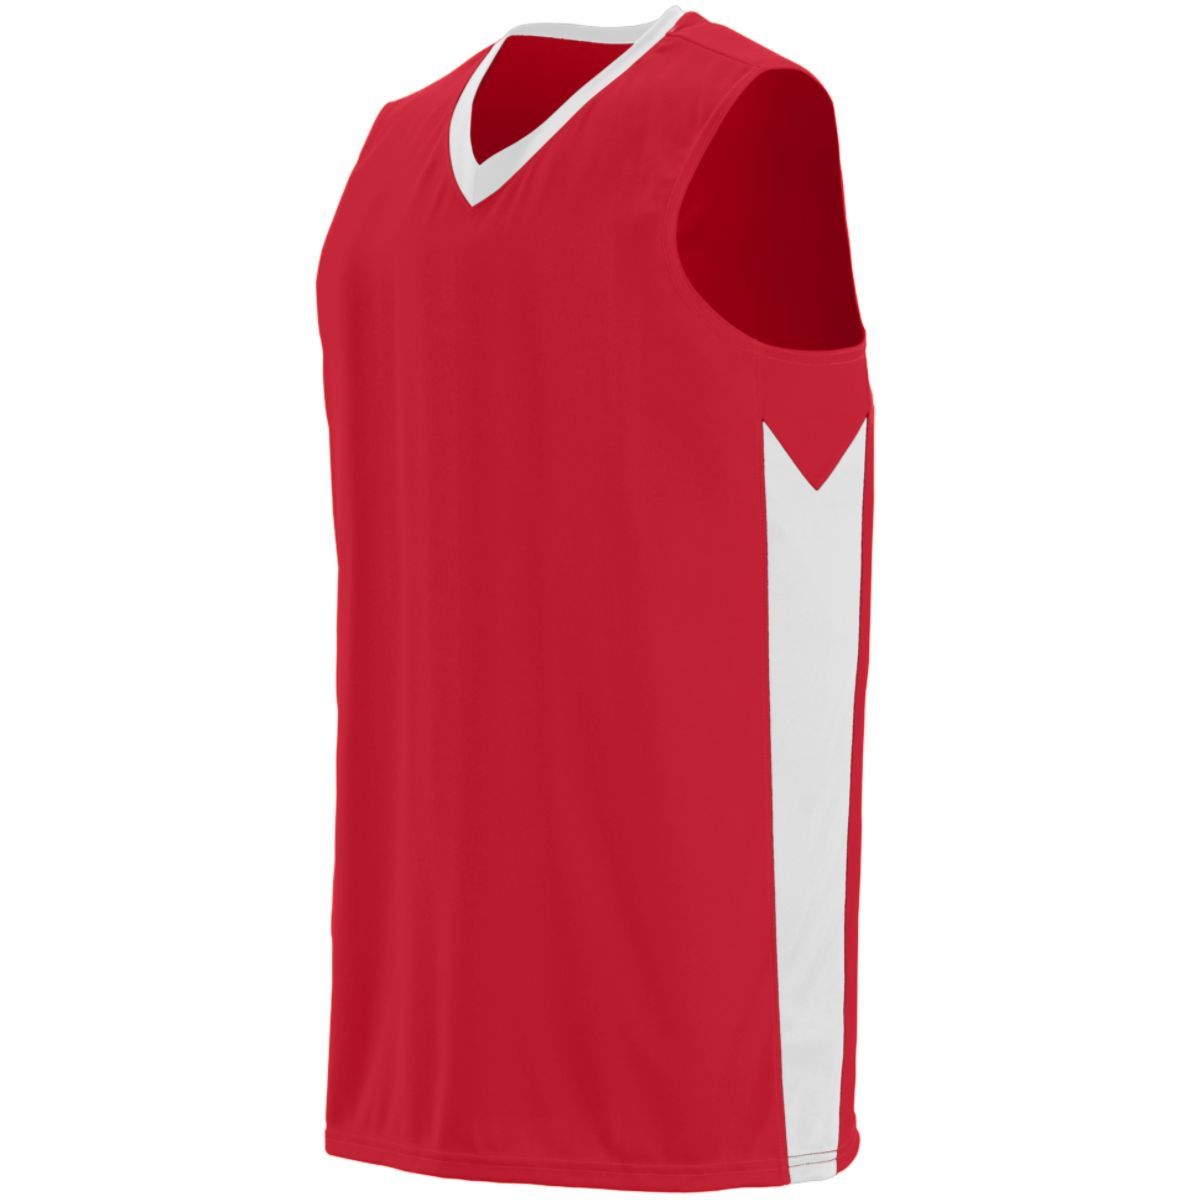 Augusta Sportswear Youth Block Out Jersey in Red/White  -Part of the Youth, Youth-Jersey, Augusta-Products, Basketball, Shirts, All-Sports, All-Sports-1 product lines at KanaleyCreations.com